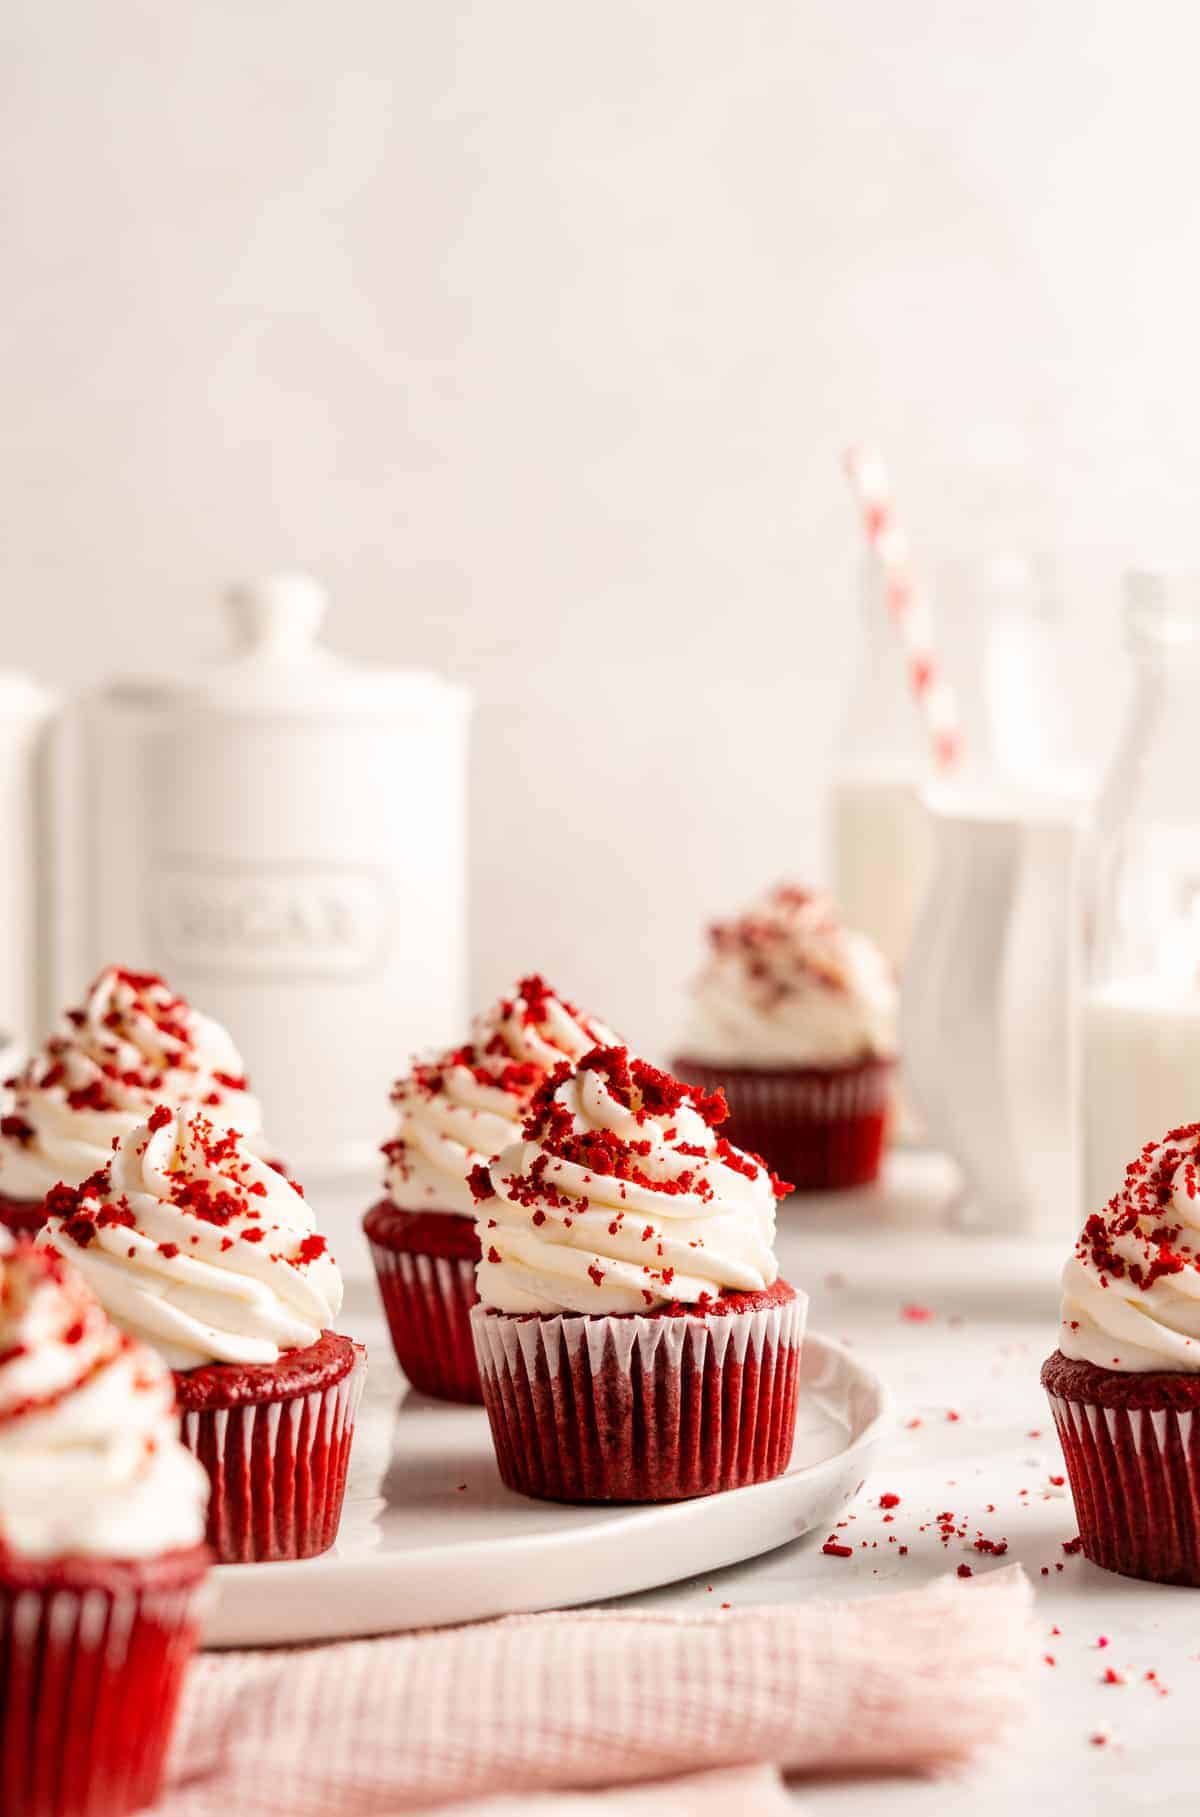 Vegan red velvet cupcakes with cream cheese frosting and cake crumbs